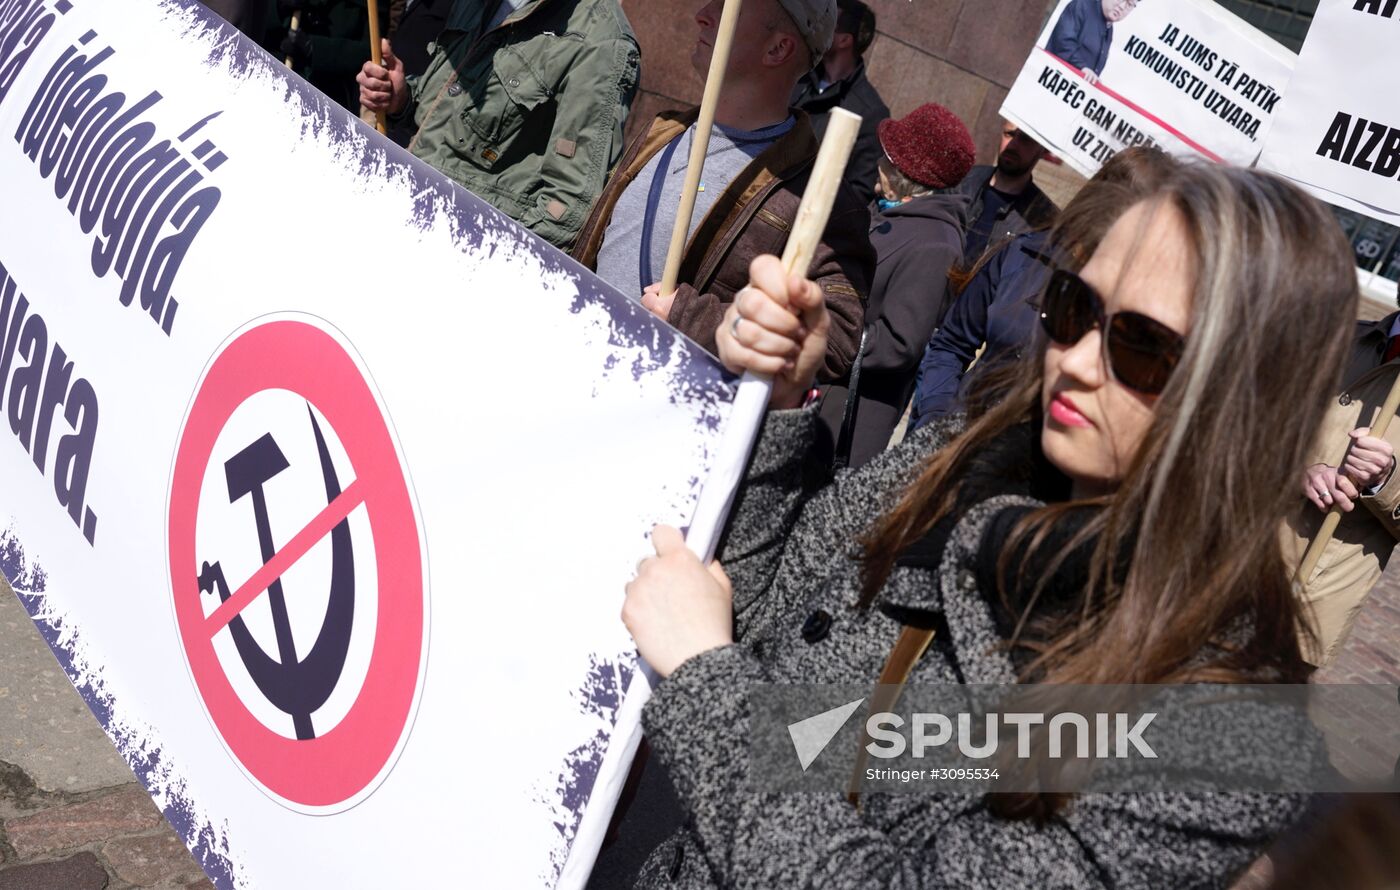 Radicals protest against Victory Day celebrations in Riga